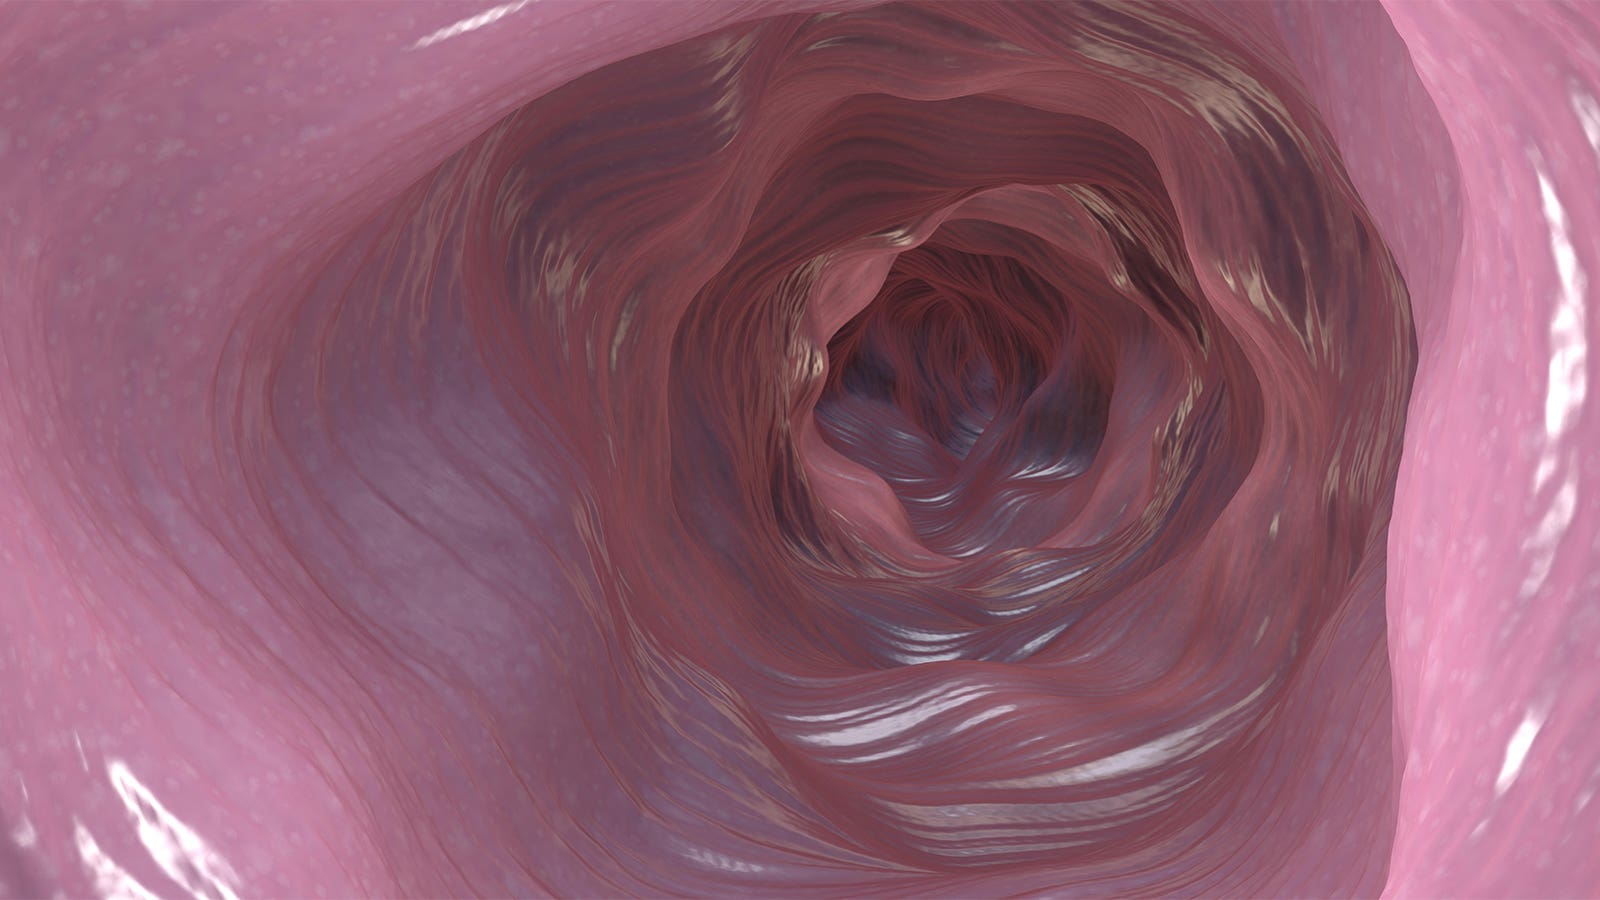 it may be safe to extend time between colonoscopy screenings, study says